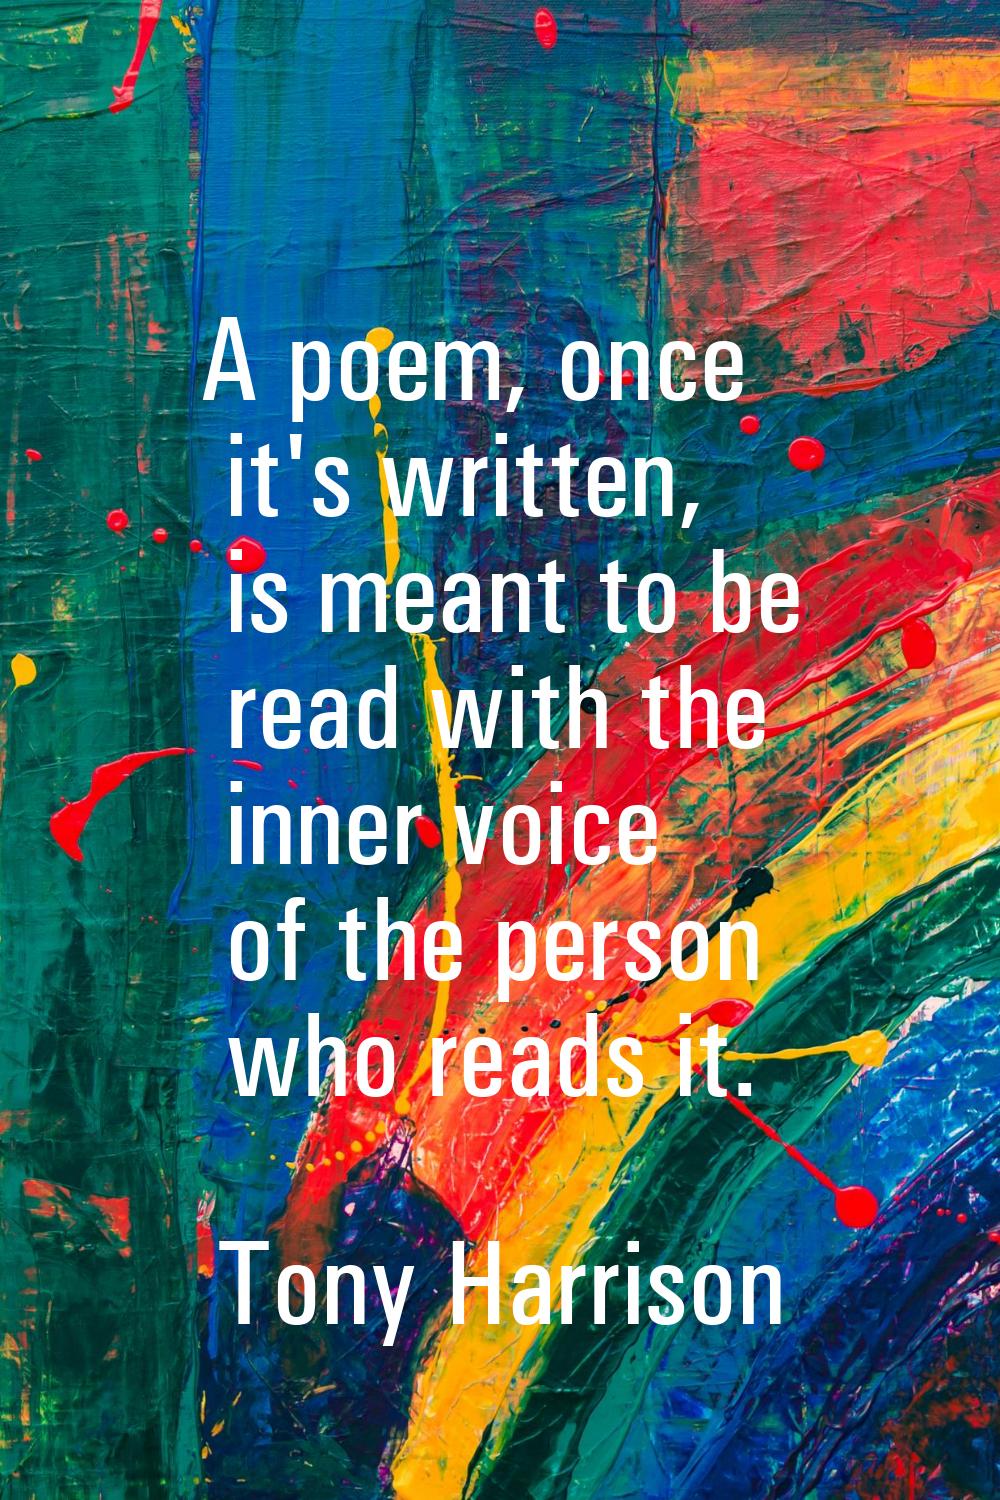 A poem, once it's written, is meant to be read with the inner voice of the person who reads it.